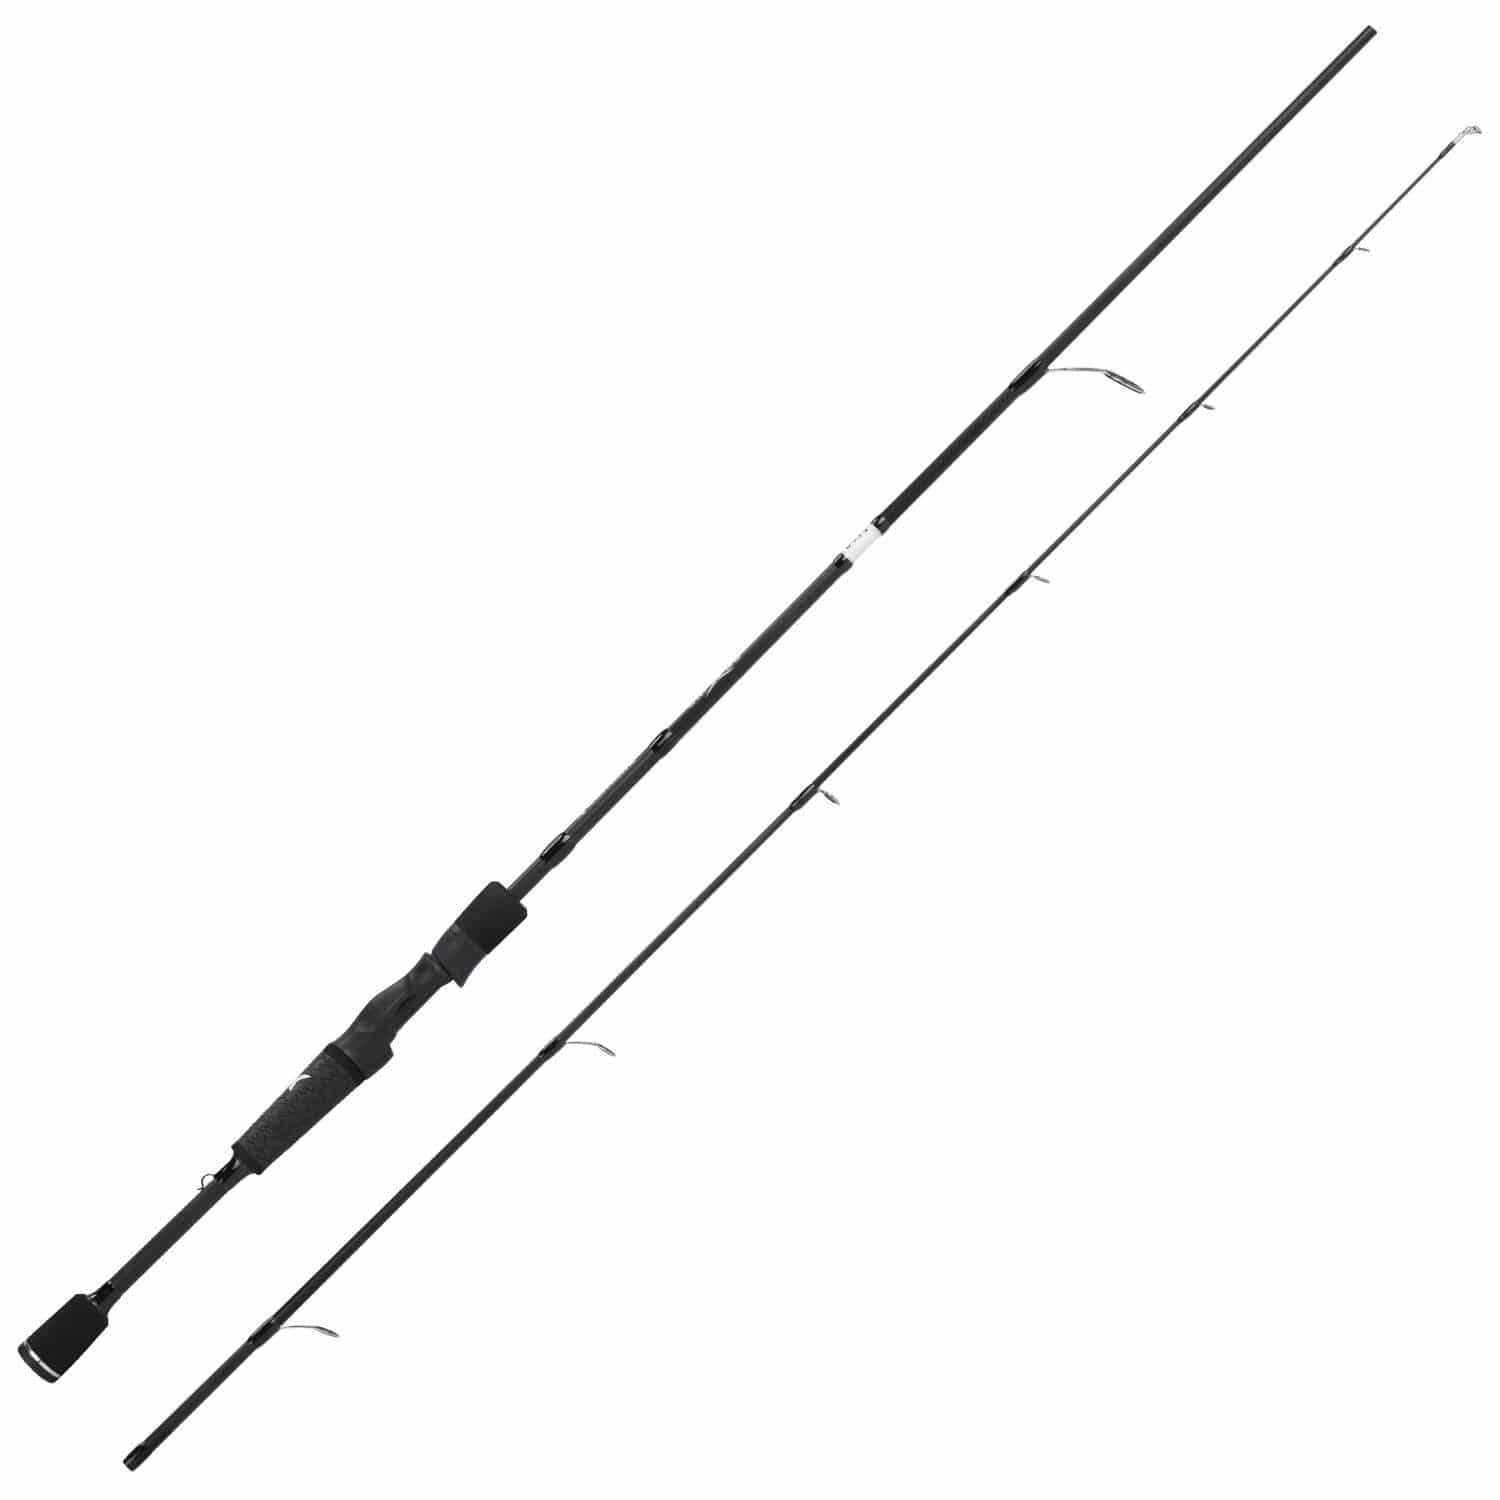 KastKing Crixus Fishing Rod and Reel Combo, Baitcasting Combo, IM6 Graphite Blank Rods,SuperPolymer Handle A: Spin-6'6 Medium-2pcs,3000 Reel